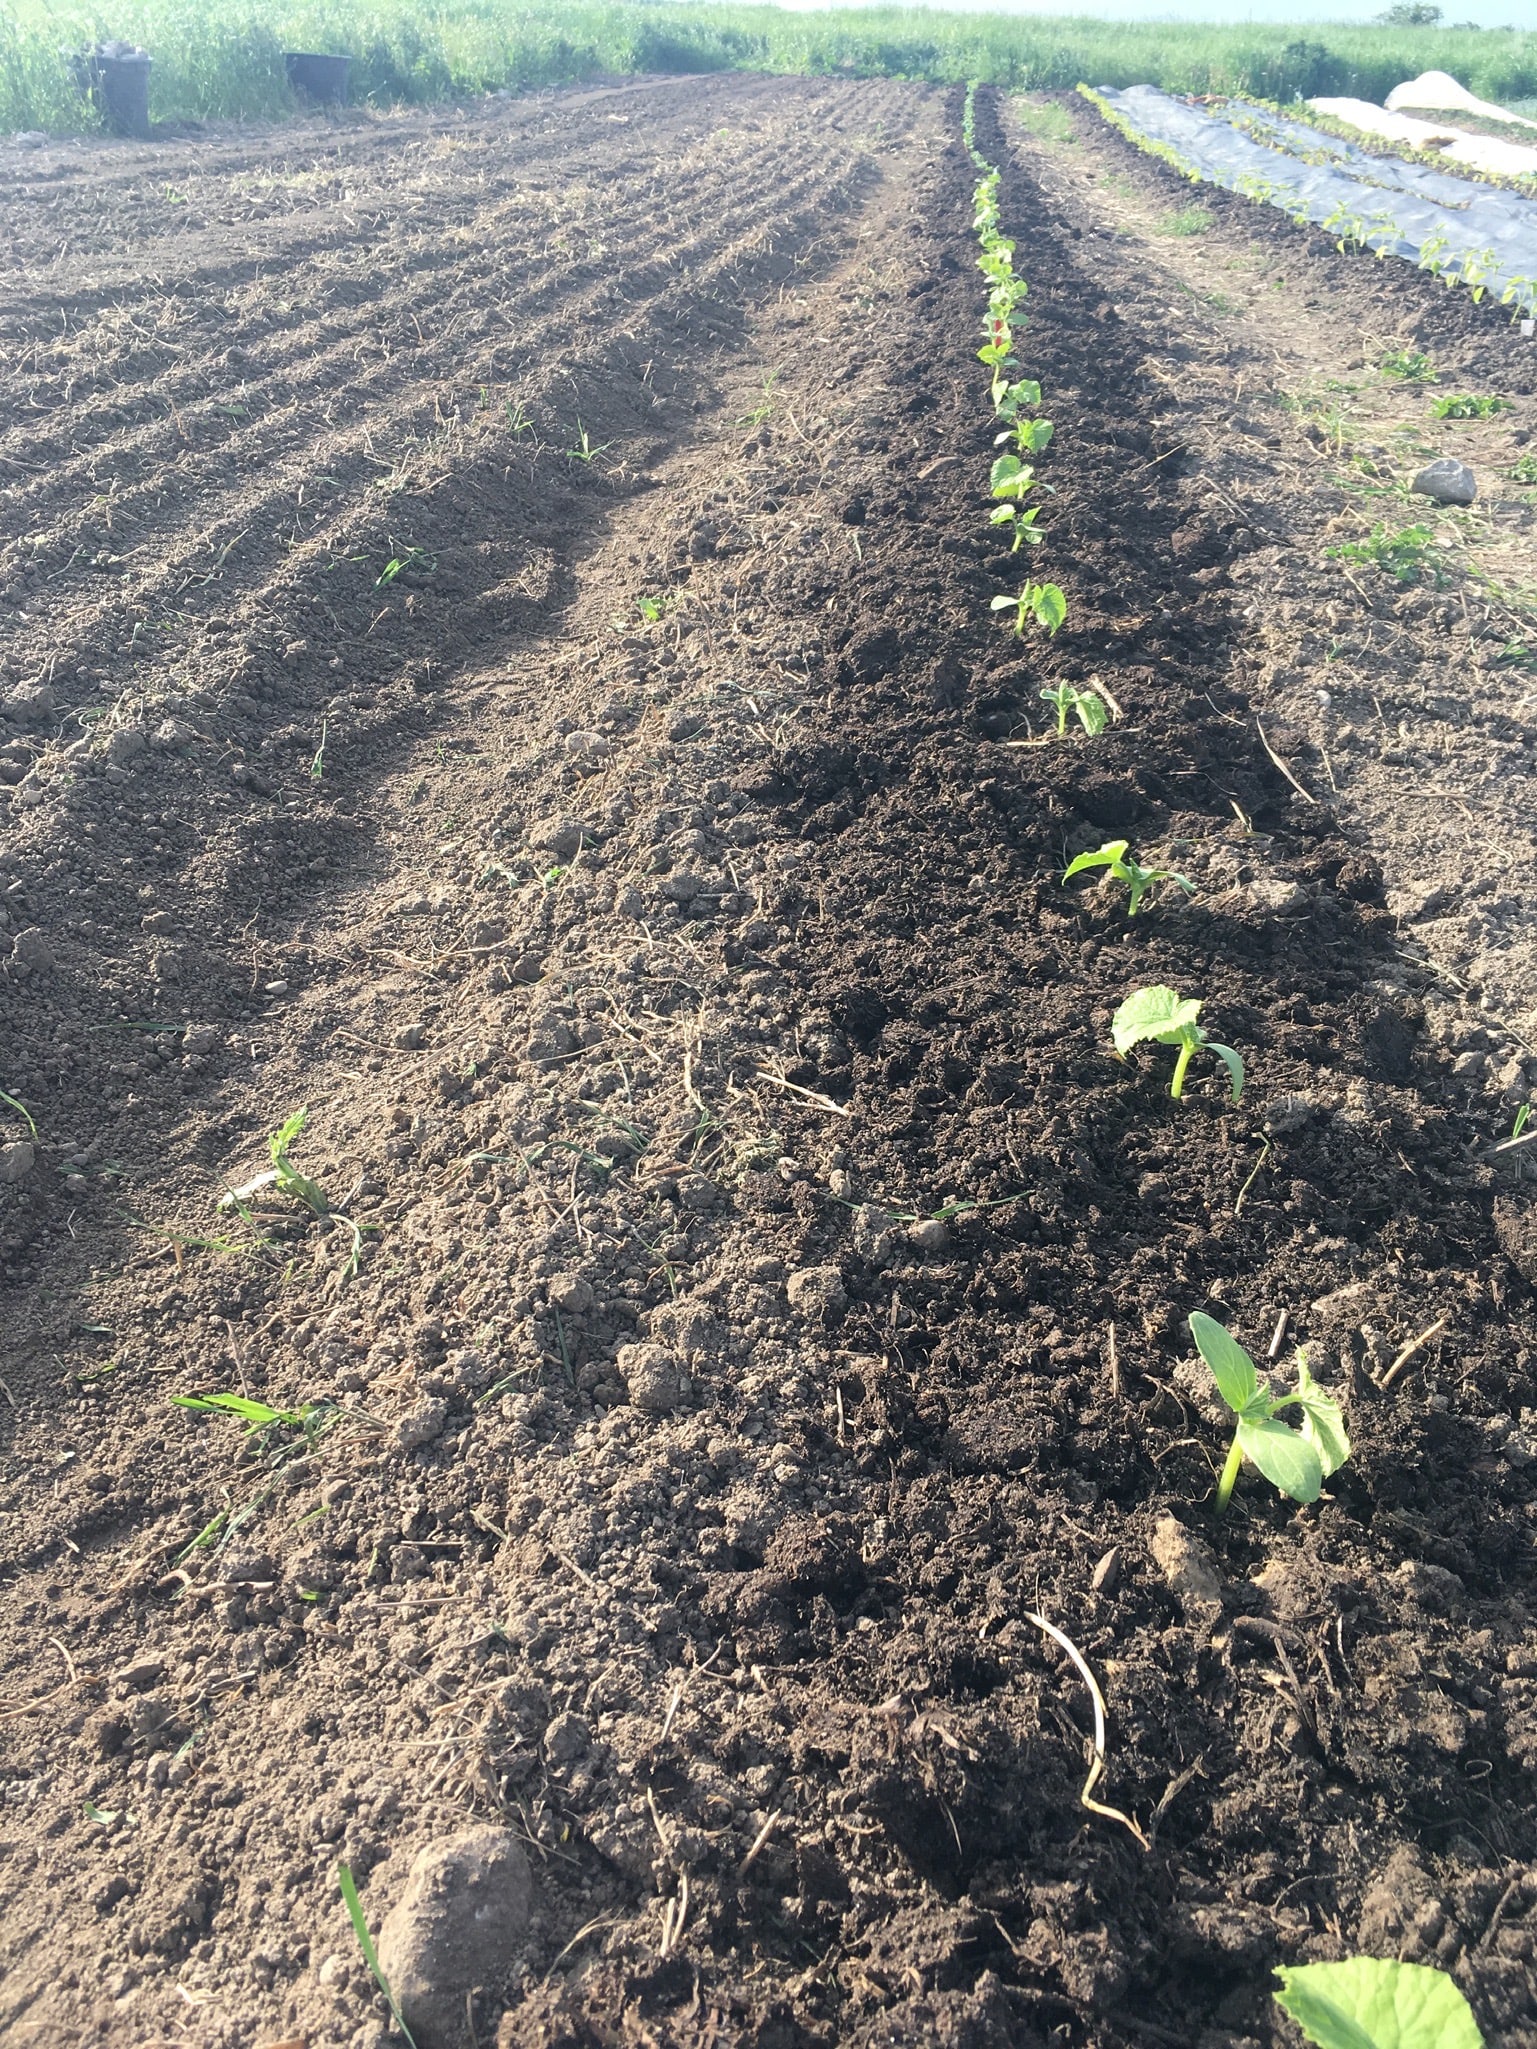 A row of freshly planted sprouting veggies on an organic vegetable farm